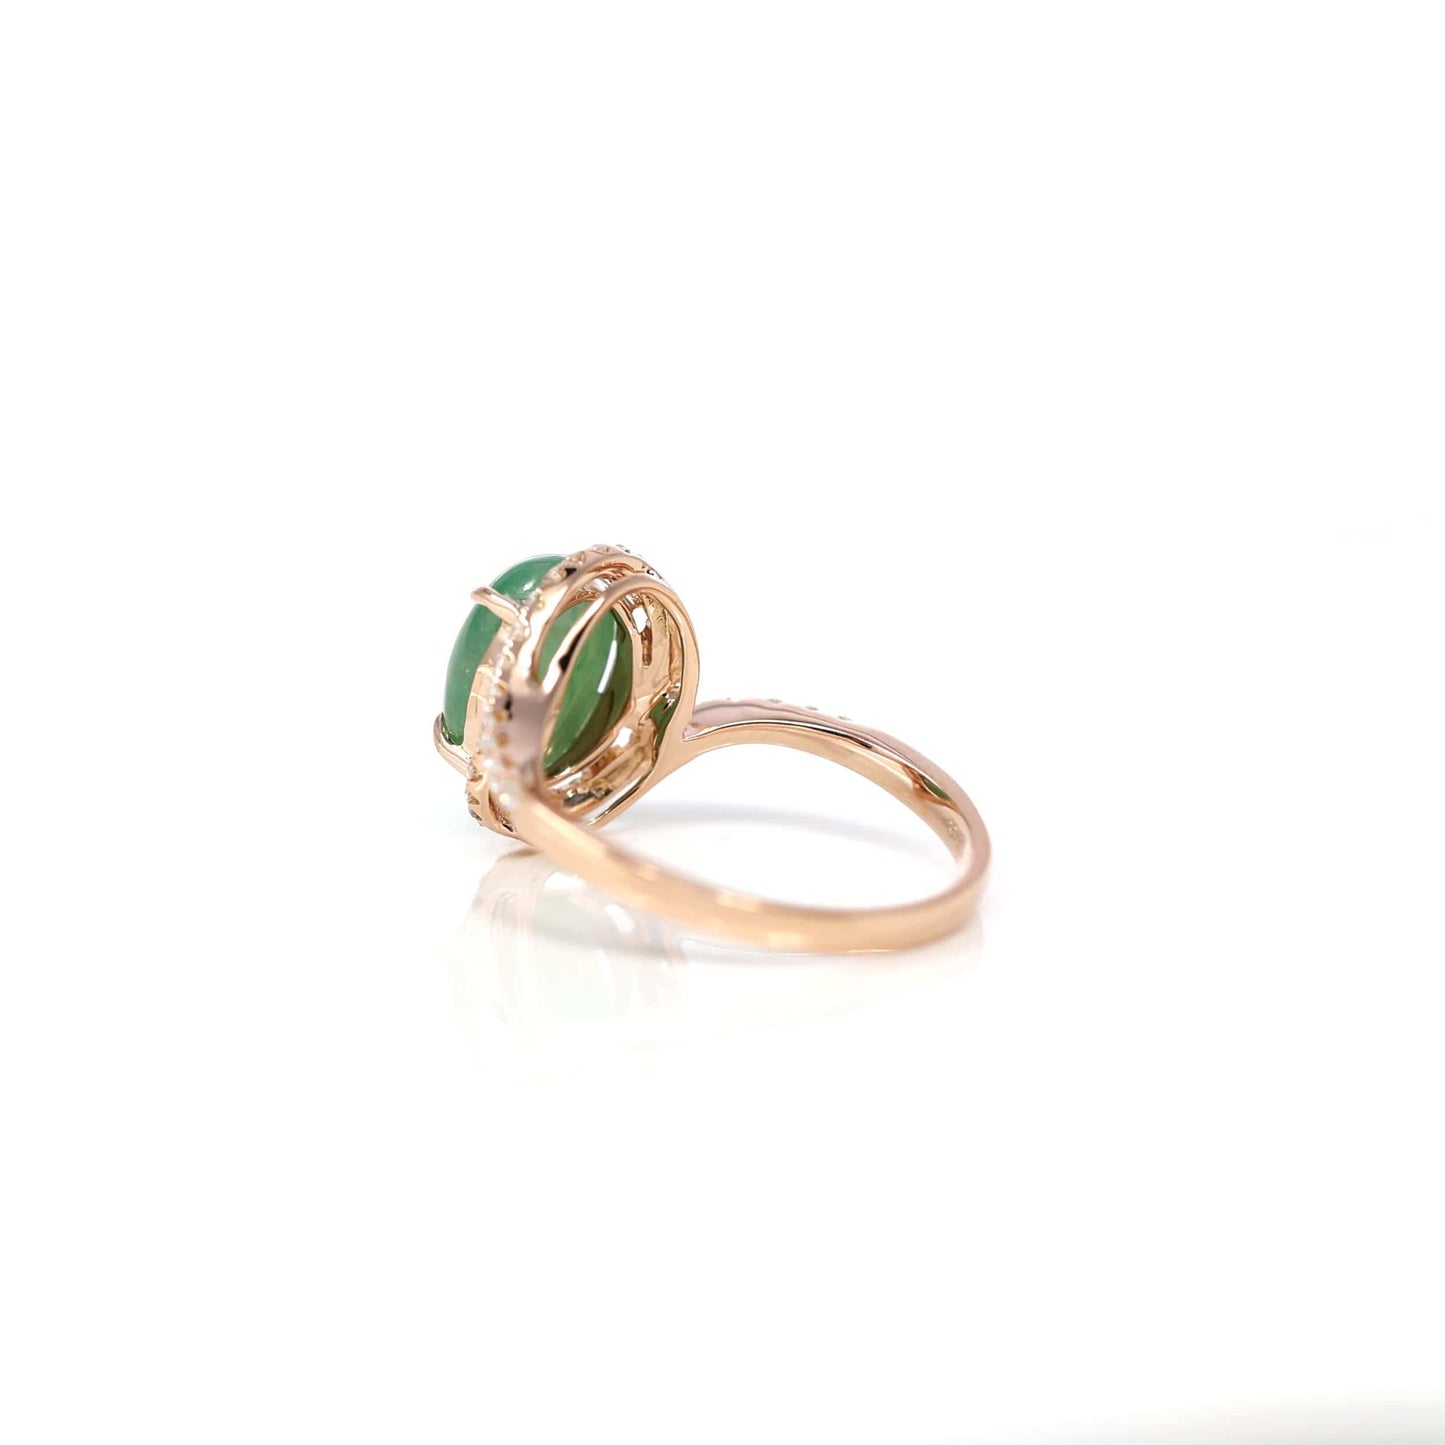 RealJade Co. Jadeite Engagement Ring 18k Rose Gold Natural Imperial Green Oval Jadeite Jade Engagement Ring With Diamonds